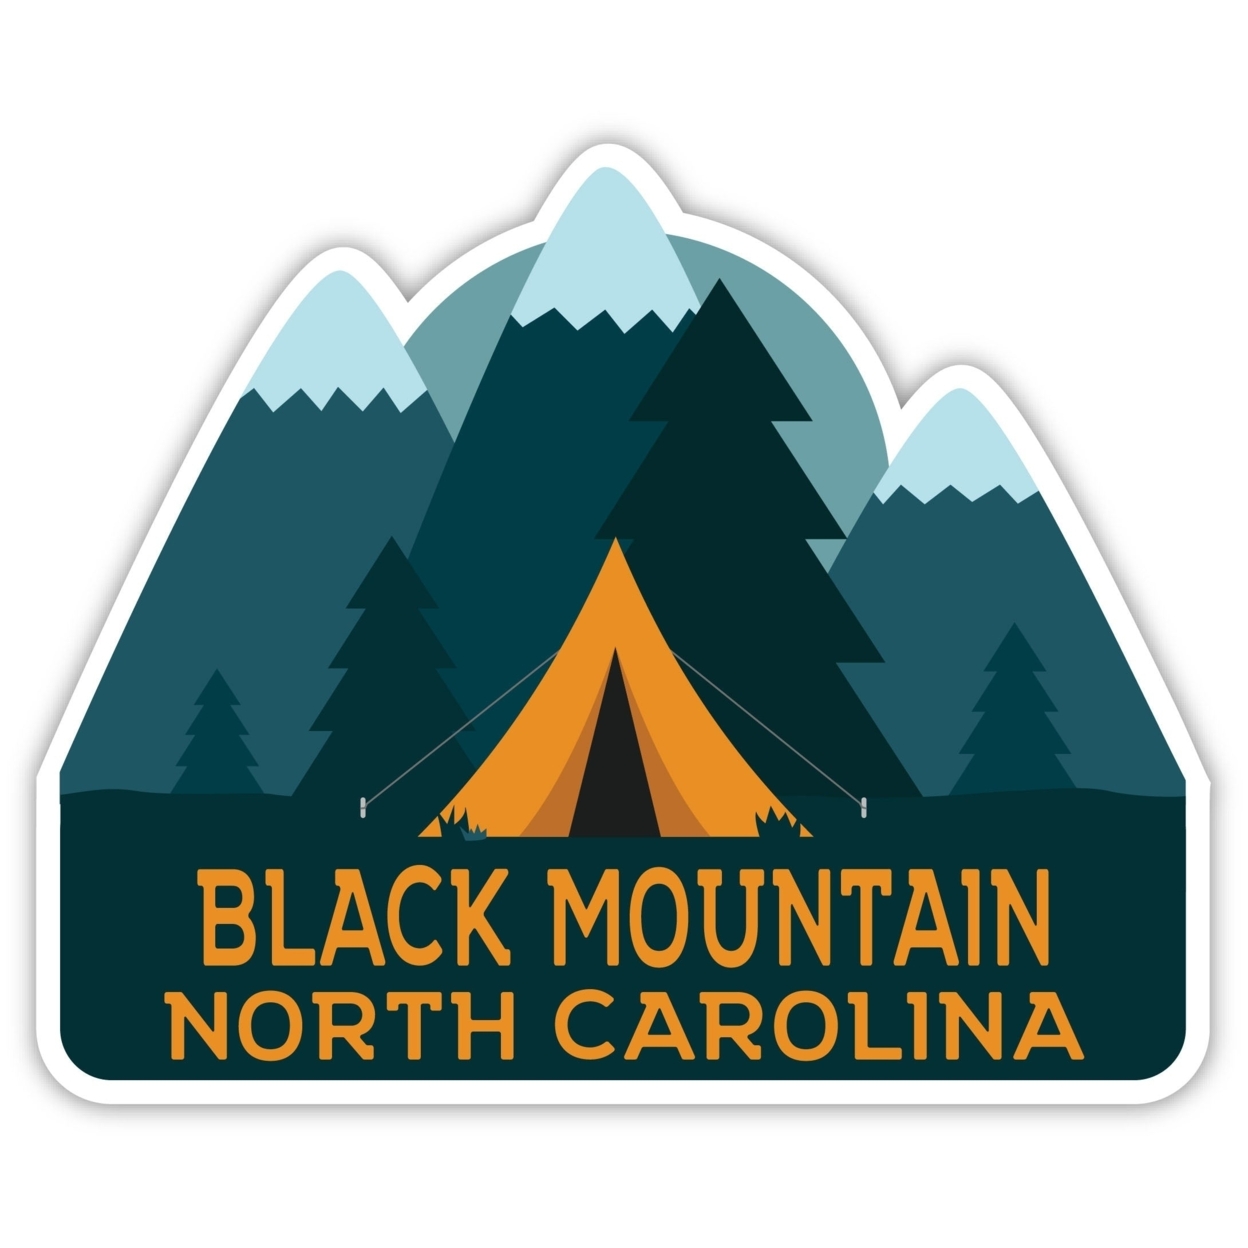 Black Mountain North Carolina Souvenir Decorative Stickers (Choose Theme And Size) - 4-Pack, 6-Inch, Tent